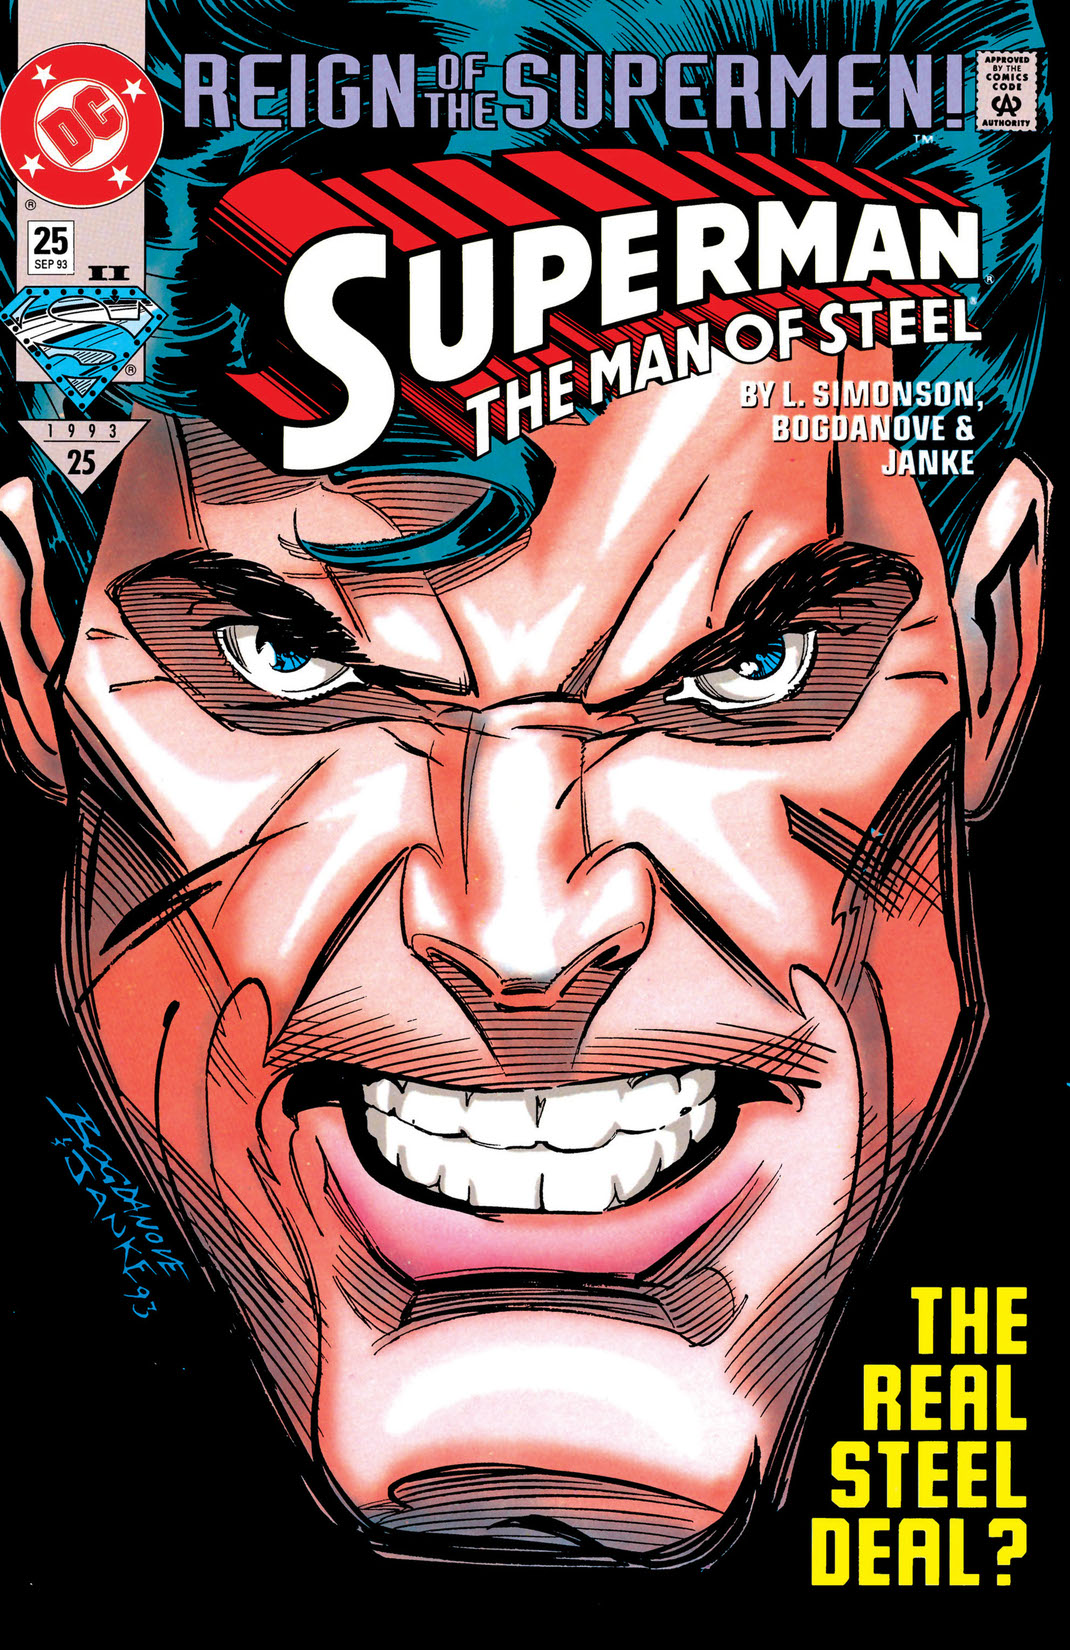 Superman: The Man of Steel #25 preview images